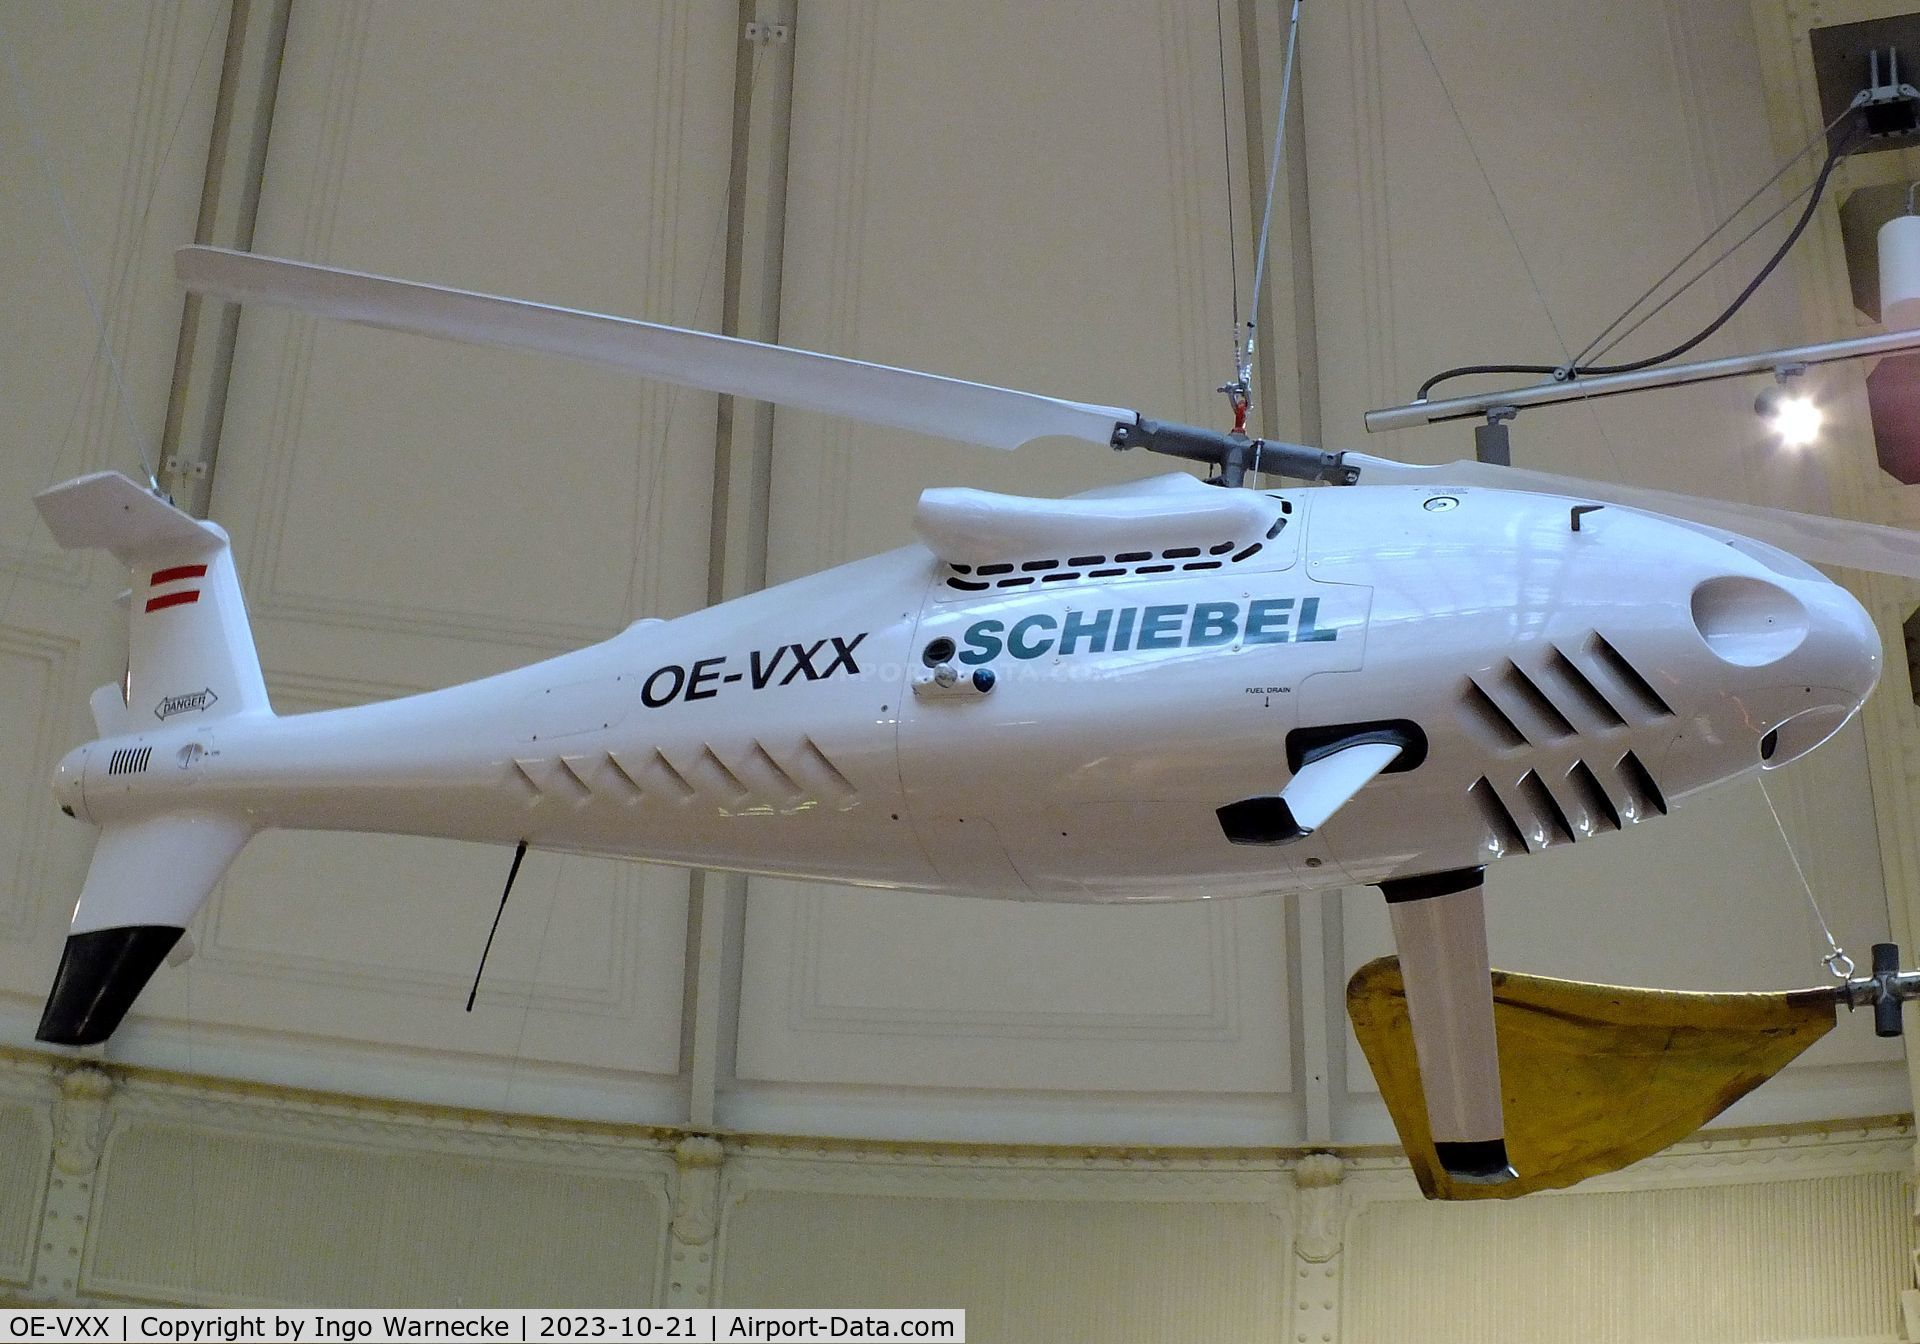 OE-VXX, Schiebel S-100 Camcopter C/N 0250, Schiebel S-100 Camcopter rotary wing drone at the Technisches Museum Wien (Vienna Technical Museum)